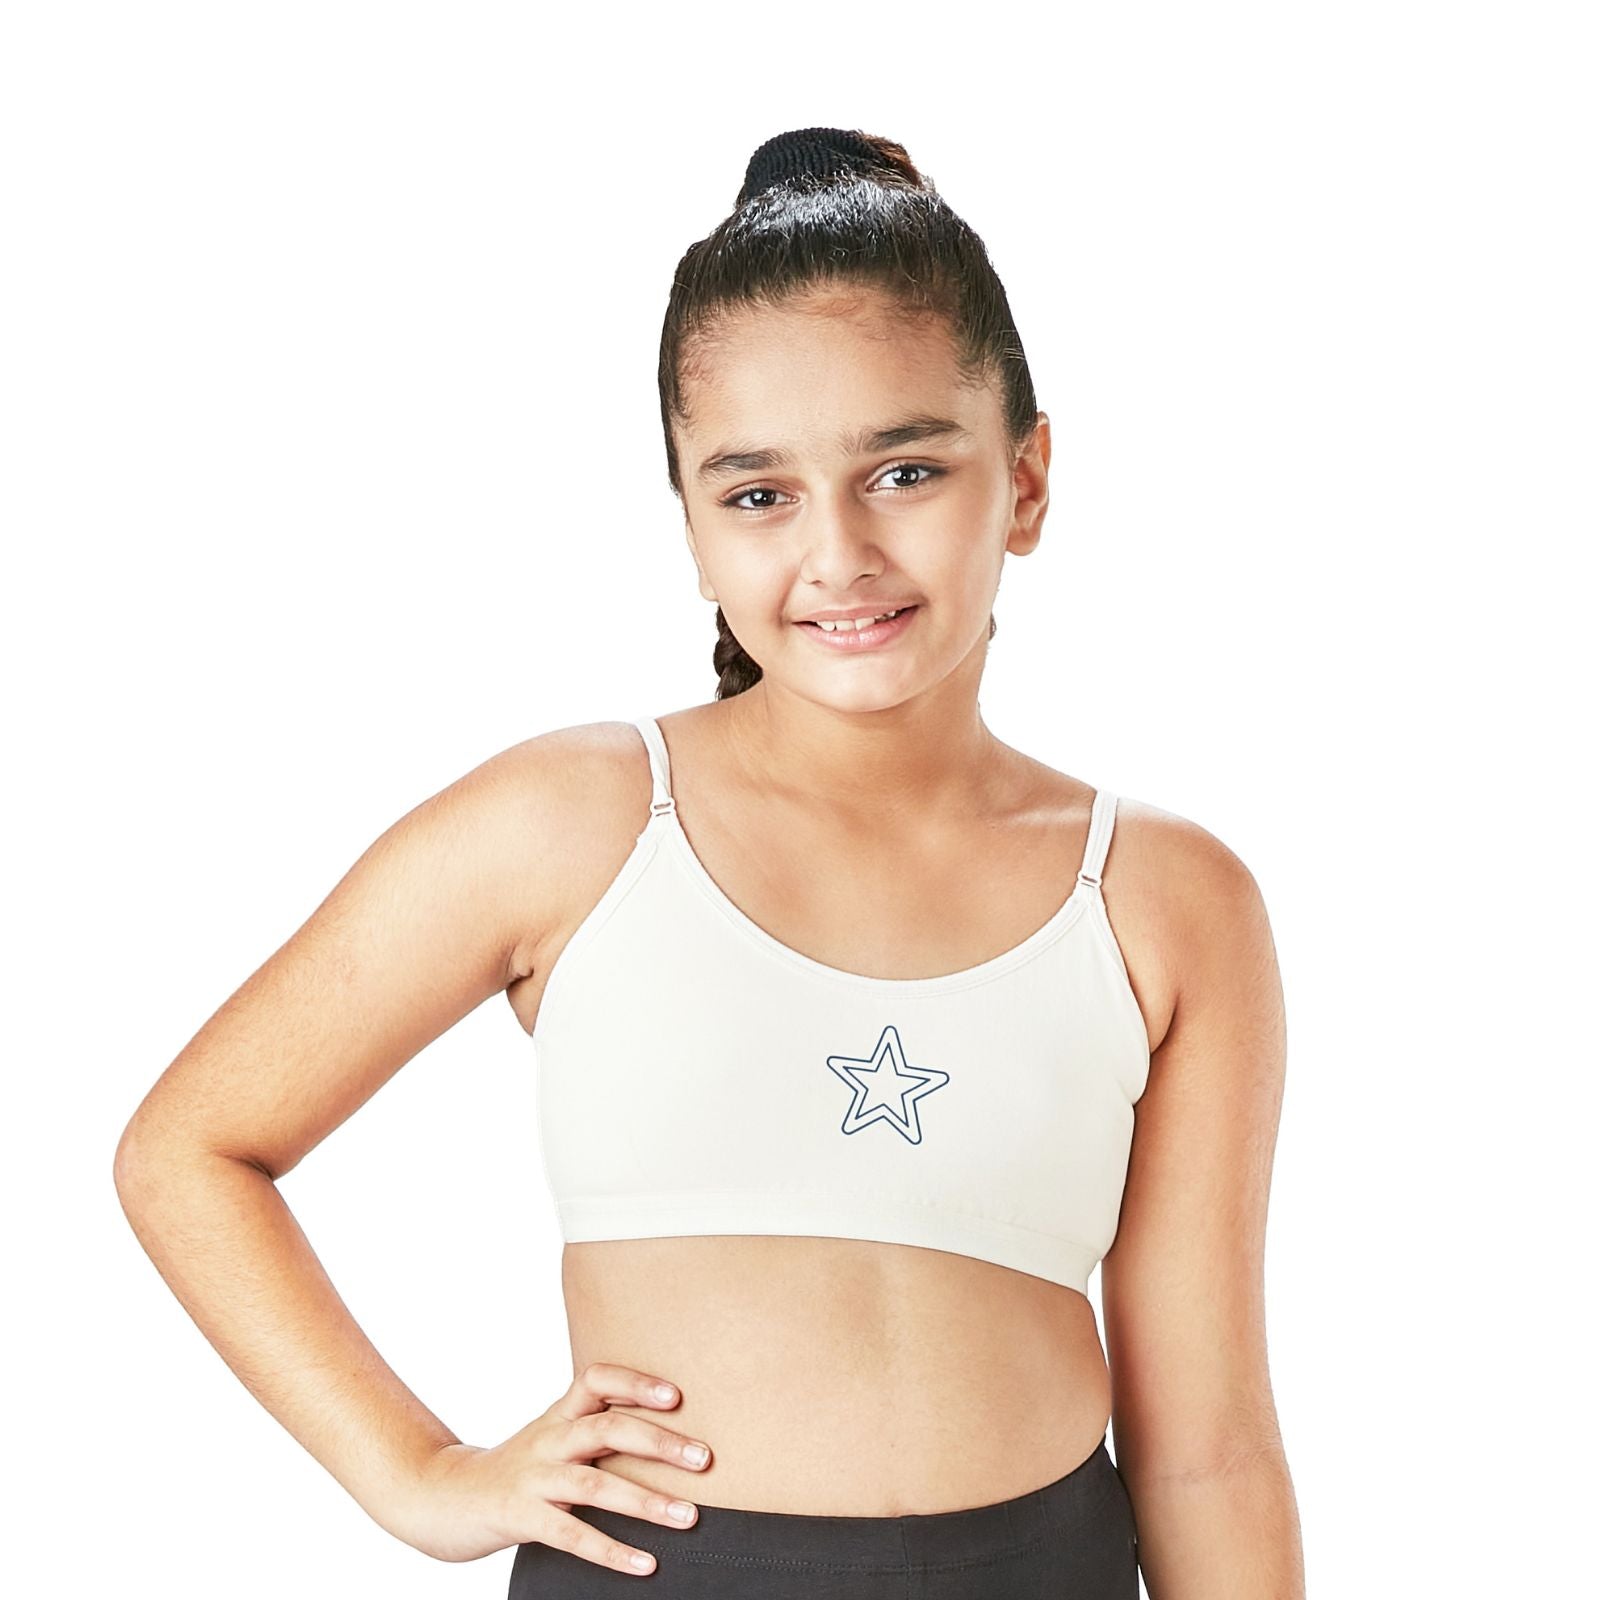 Is your teenager ready to wear a training bra? – Plan B